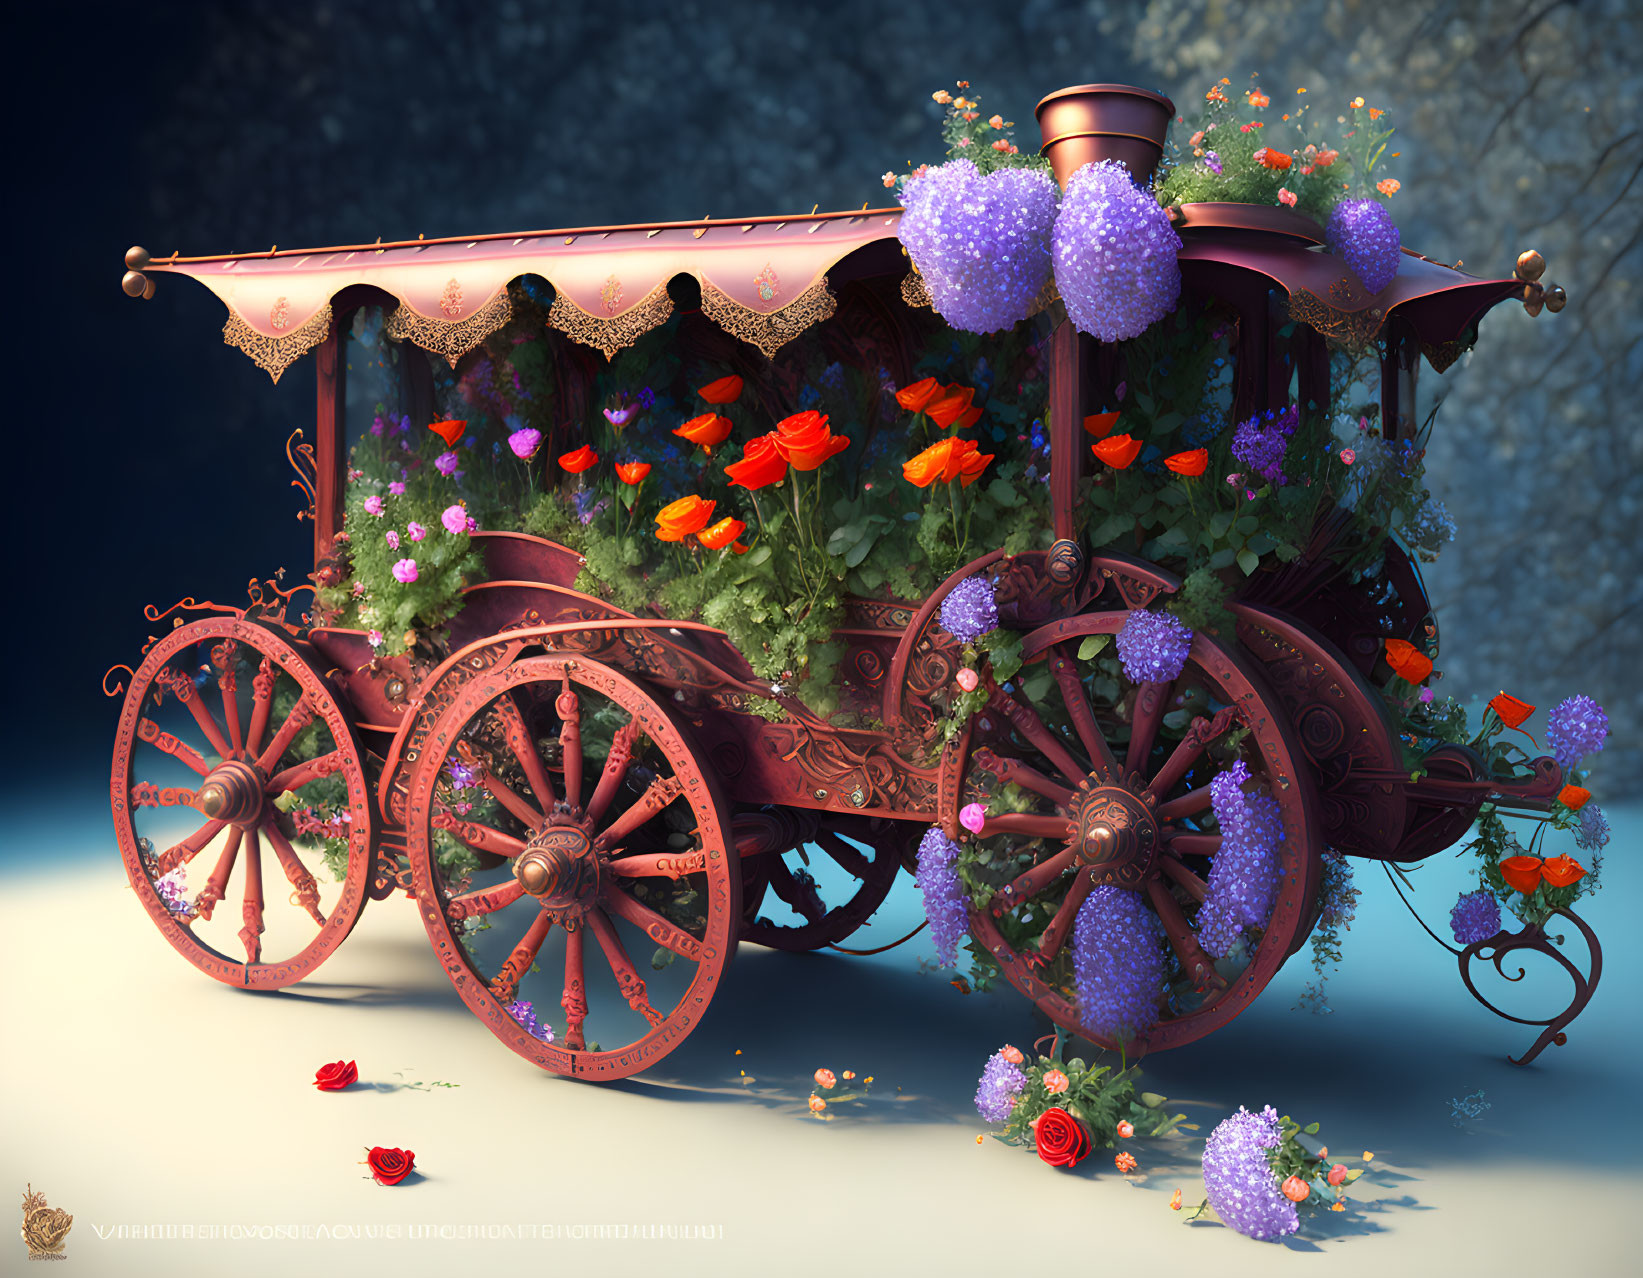 Vintage ornate cart with vibrant flowers and metalwork on wooden wheels